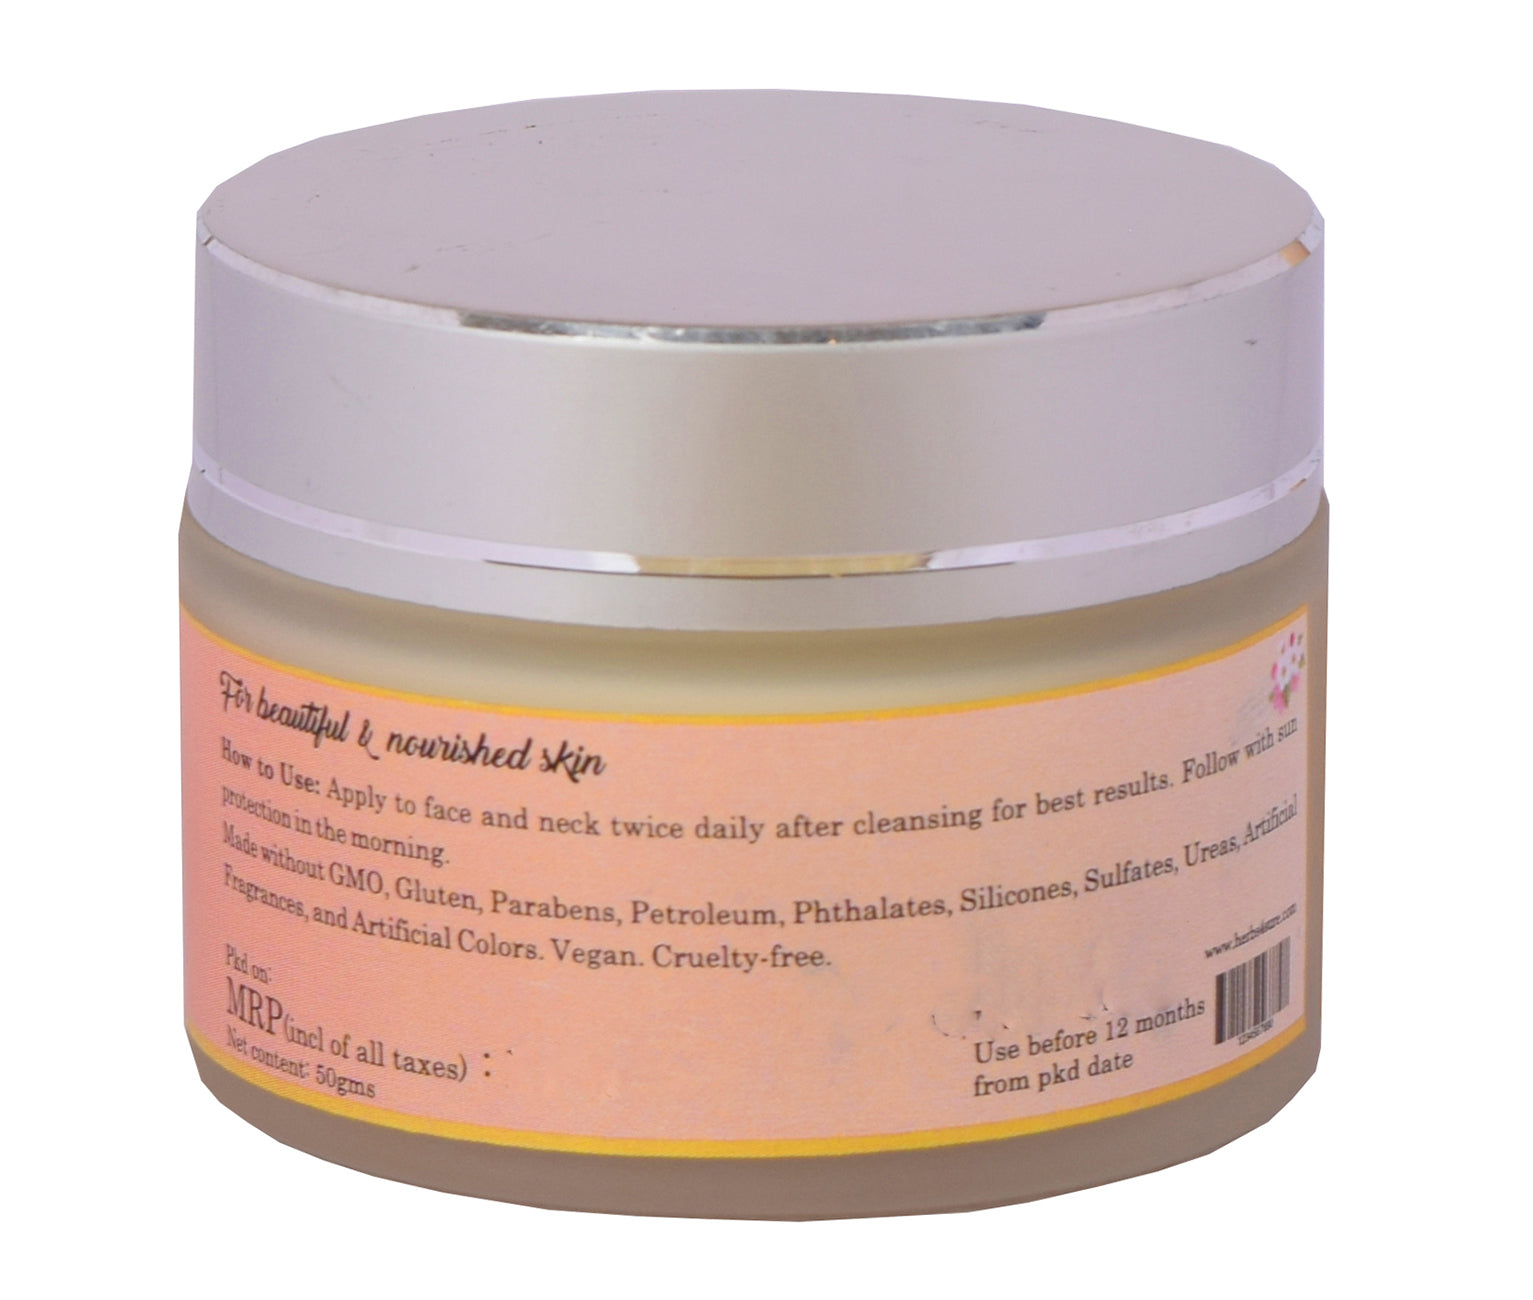 UJJWALA FACE CREAM-ANTI AGEING-DAILY MOISTURIZING CREAM- ULTRA HYDRATING-FOR MATURE SKIN WITH PIGMENTATION -IMPROVES COMPLEXION with SPF 35